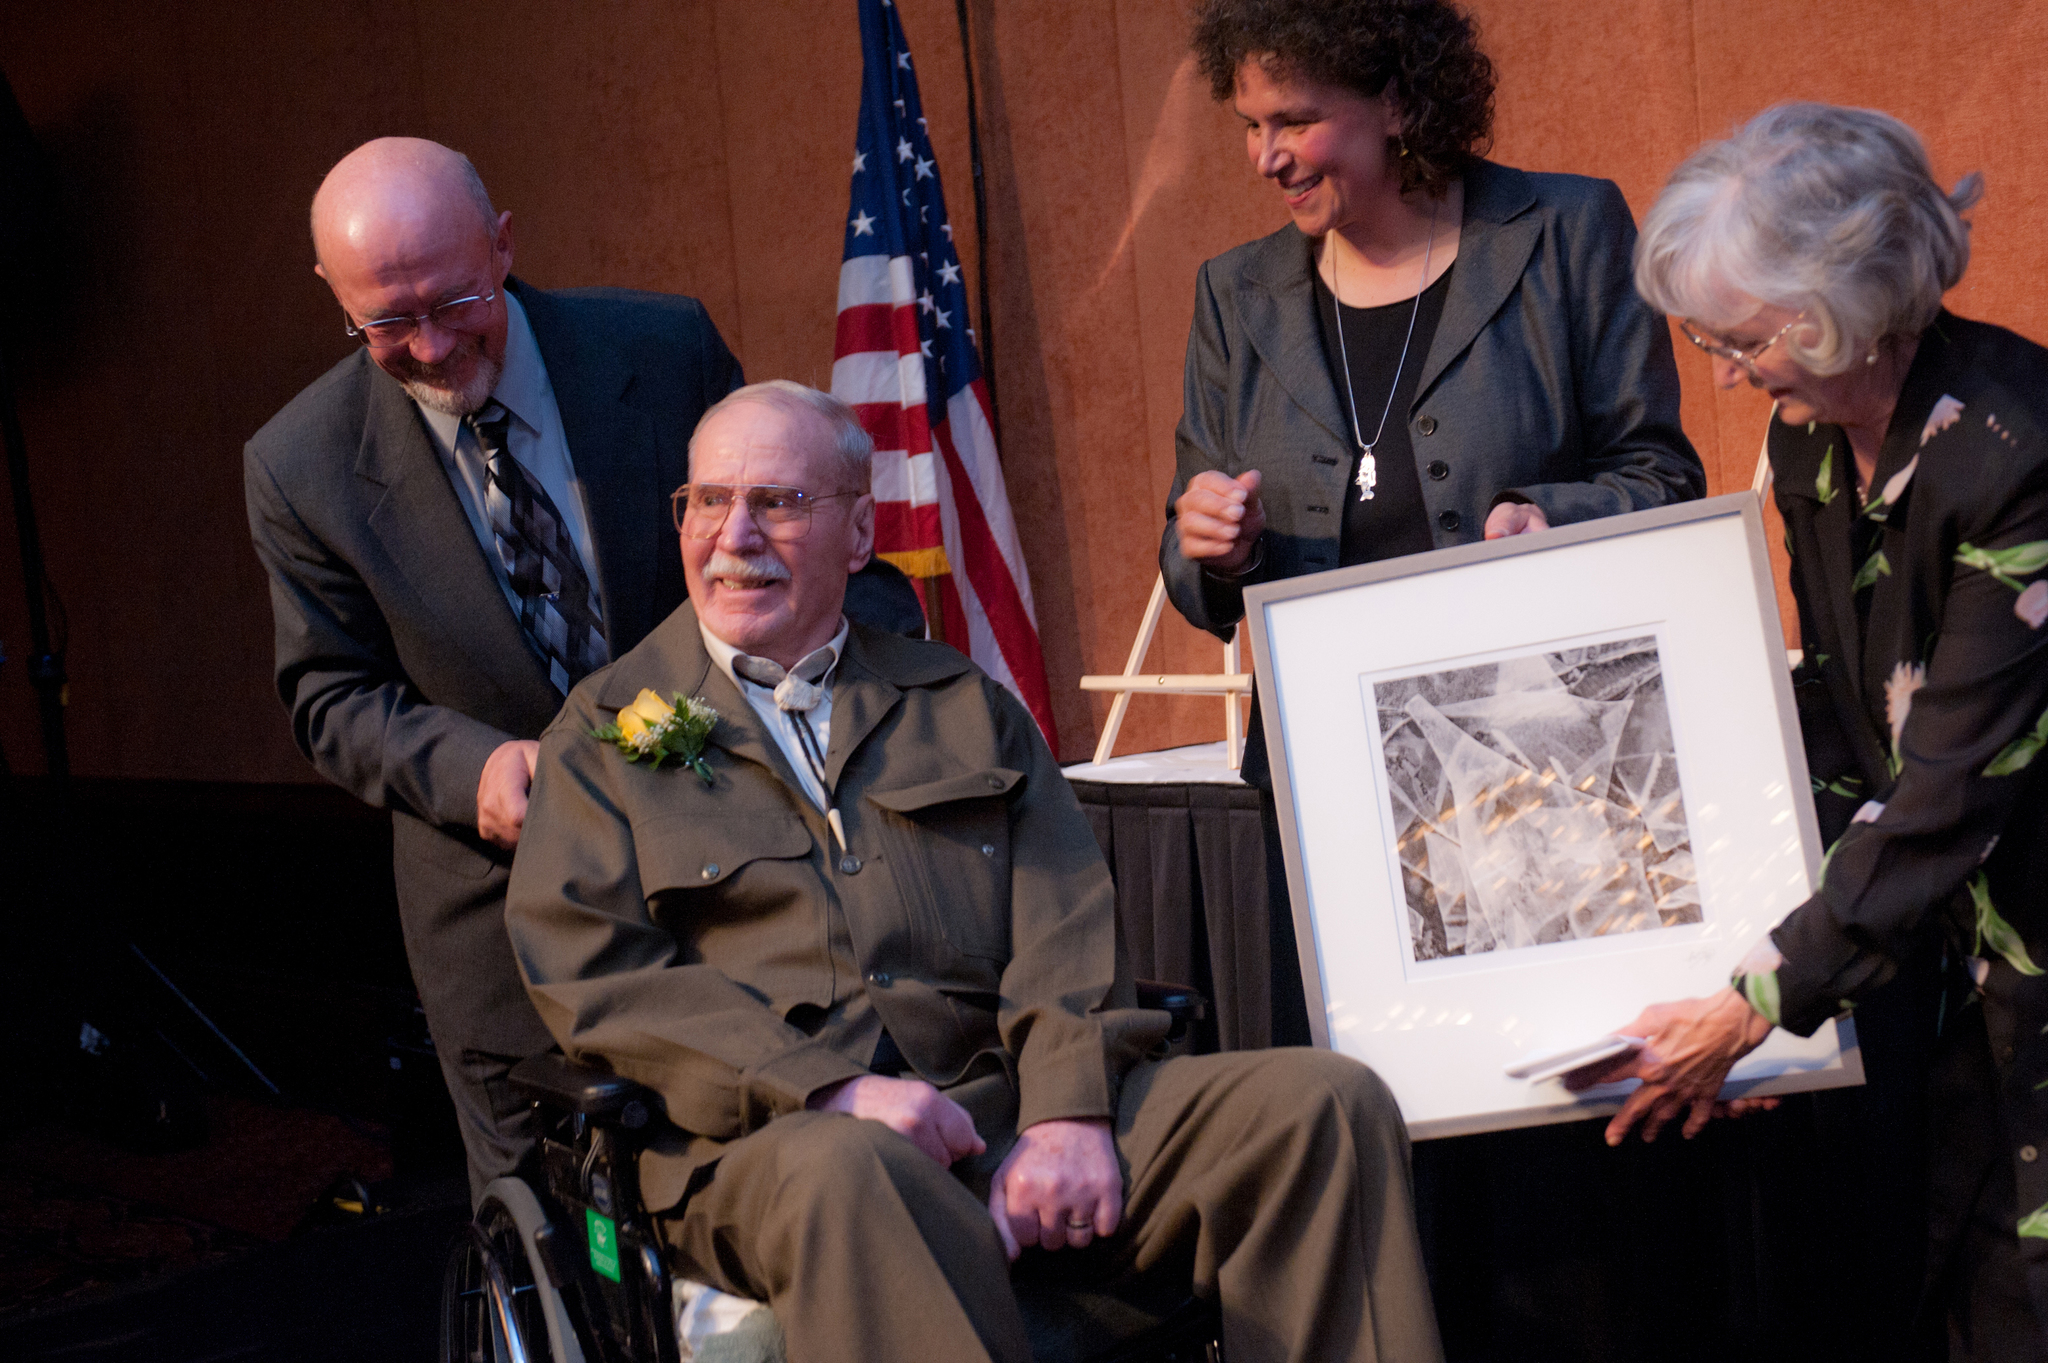 Jim Rearden, center, wearing his Alaska tuxedo, receives the 2011 Governor’s Award for the Humanities from Commissioner of Commerce & Economic Development Susan Bell as his wife, Audrey, far right, and son, Mike Rearden, watch. Homer writer Jim Rearden, center, smiles at the crowd following the presentation of his humanities award at the Alaska State Council on the Arts Governor’s Awards Banquet Oct. 19. With Rearden are, from left, his son Mike, Commissioner of Commerce & Economic Development Susan Bell and wife, Audrey Rearden.